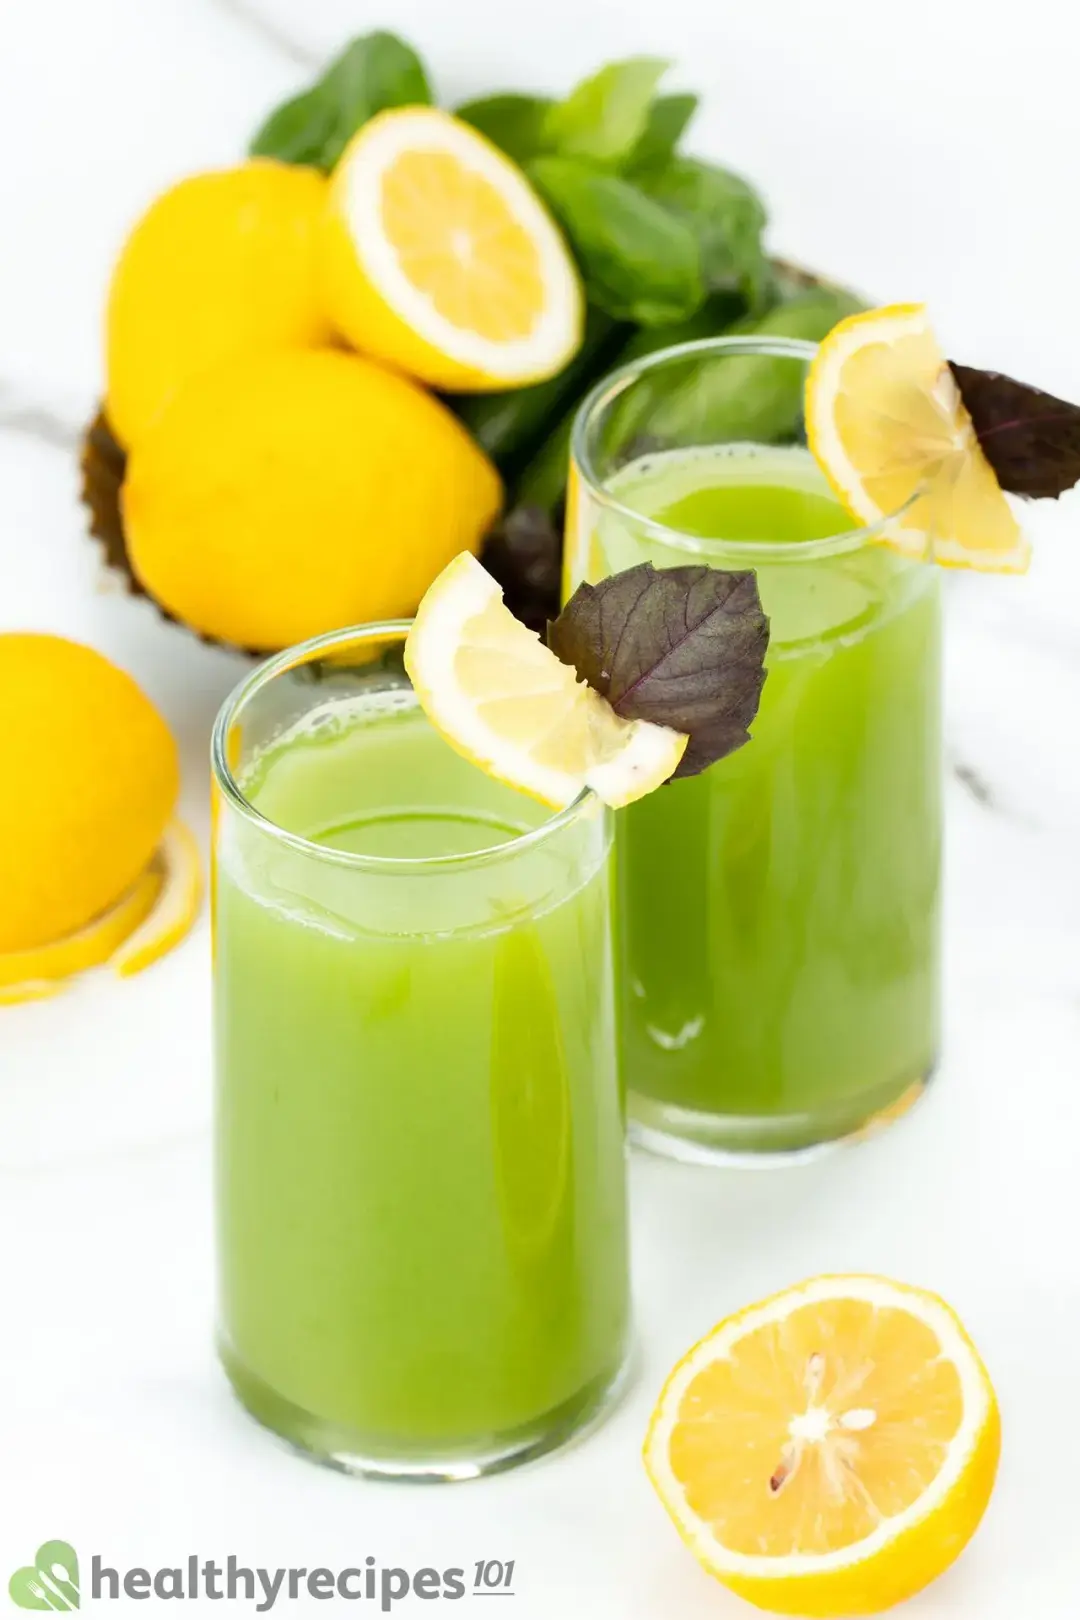 Two glasses of cucumber lemon drinks garnished with lemons, purple leaves, and next to some whole lemons